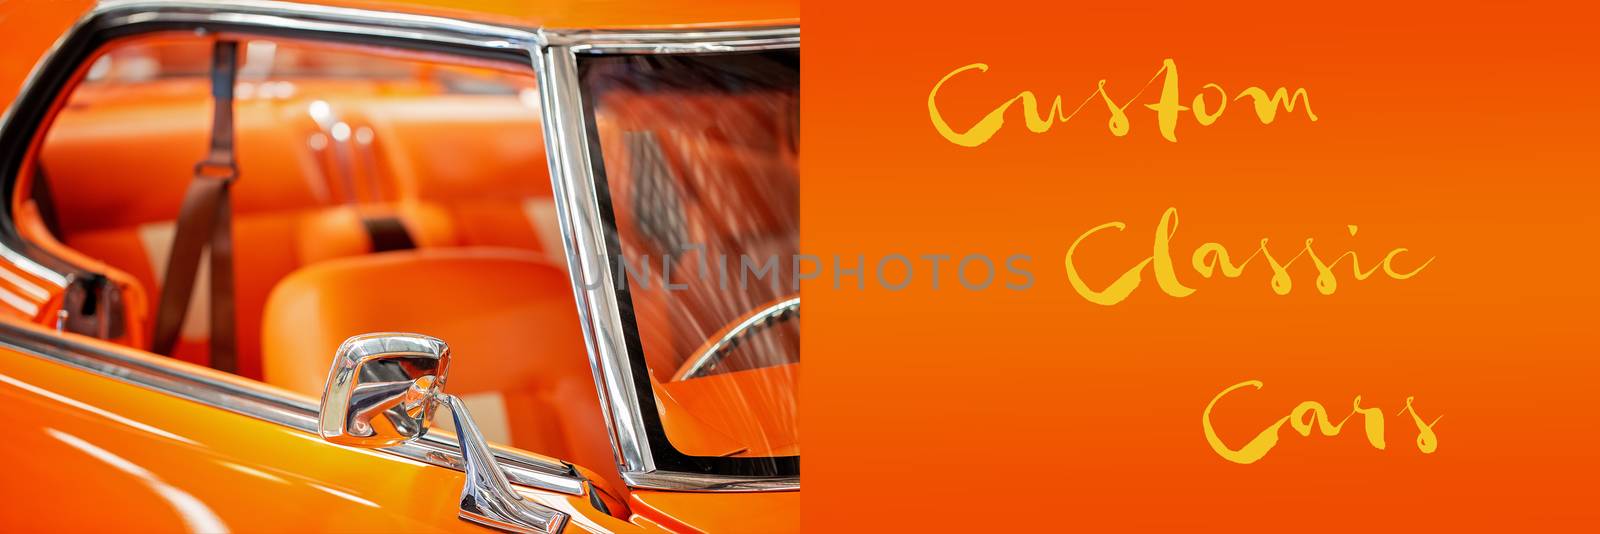 Custom vintage car banner with custom classic cars text announcement by 	JacksonStock